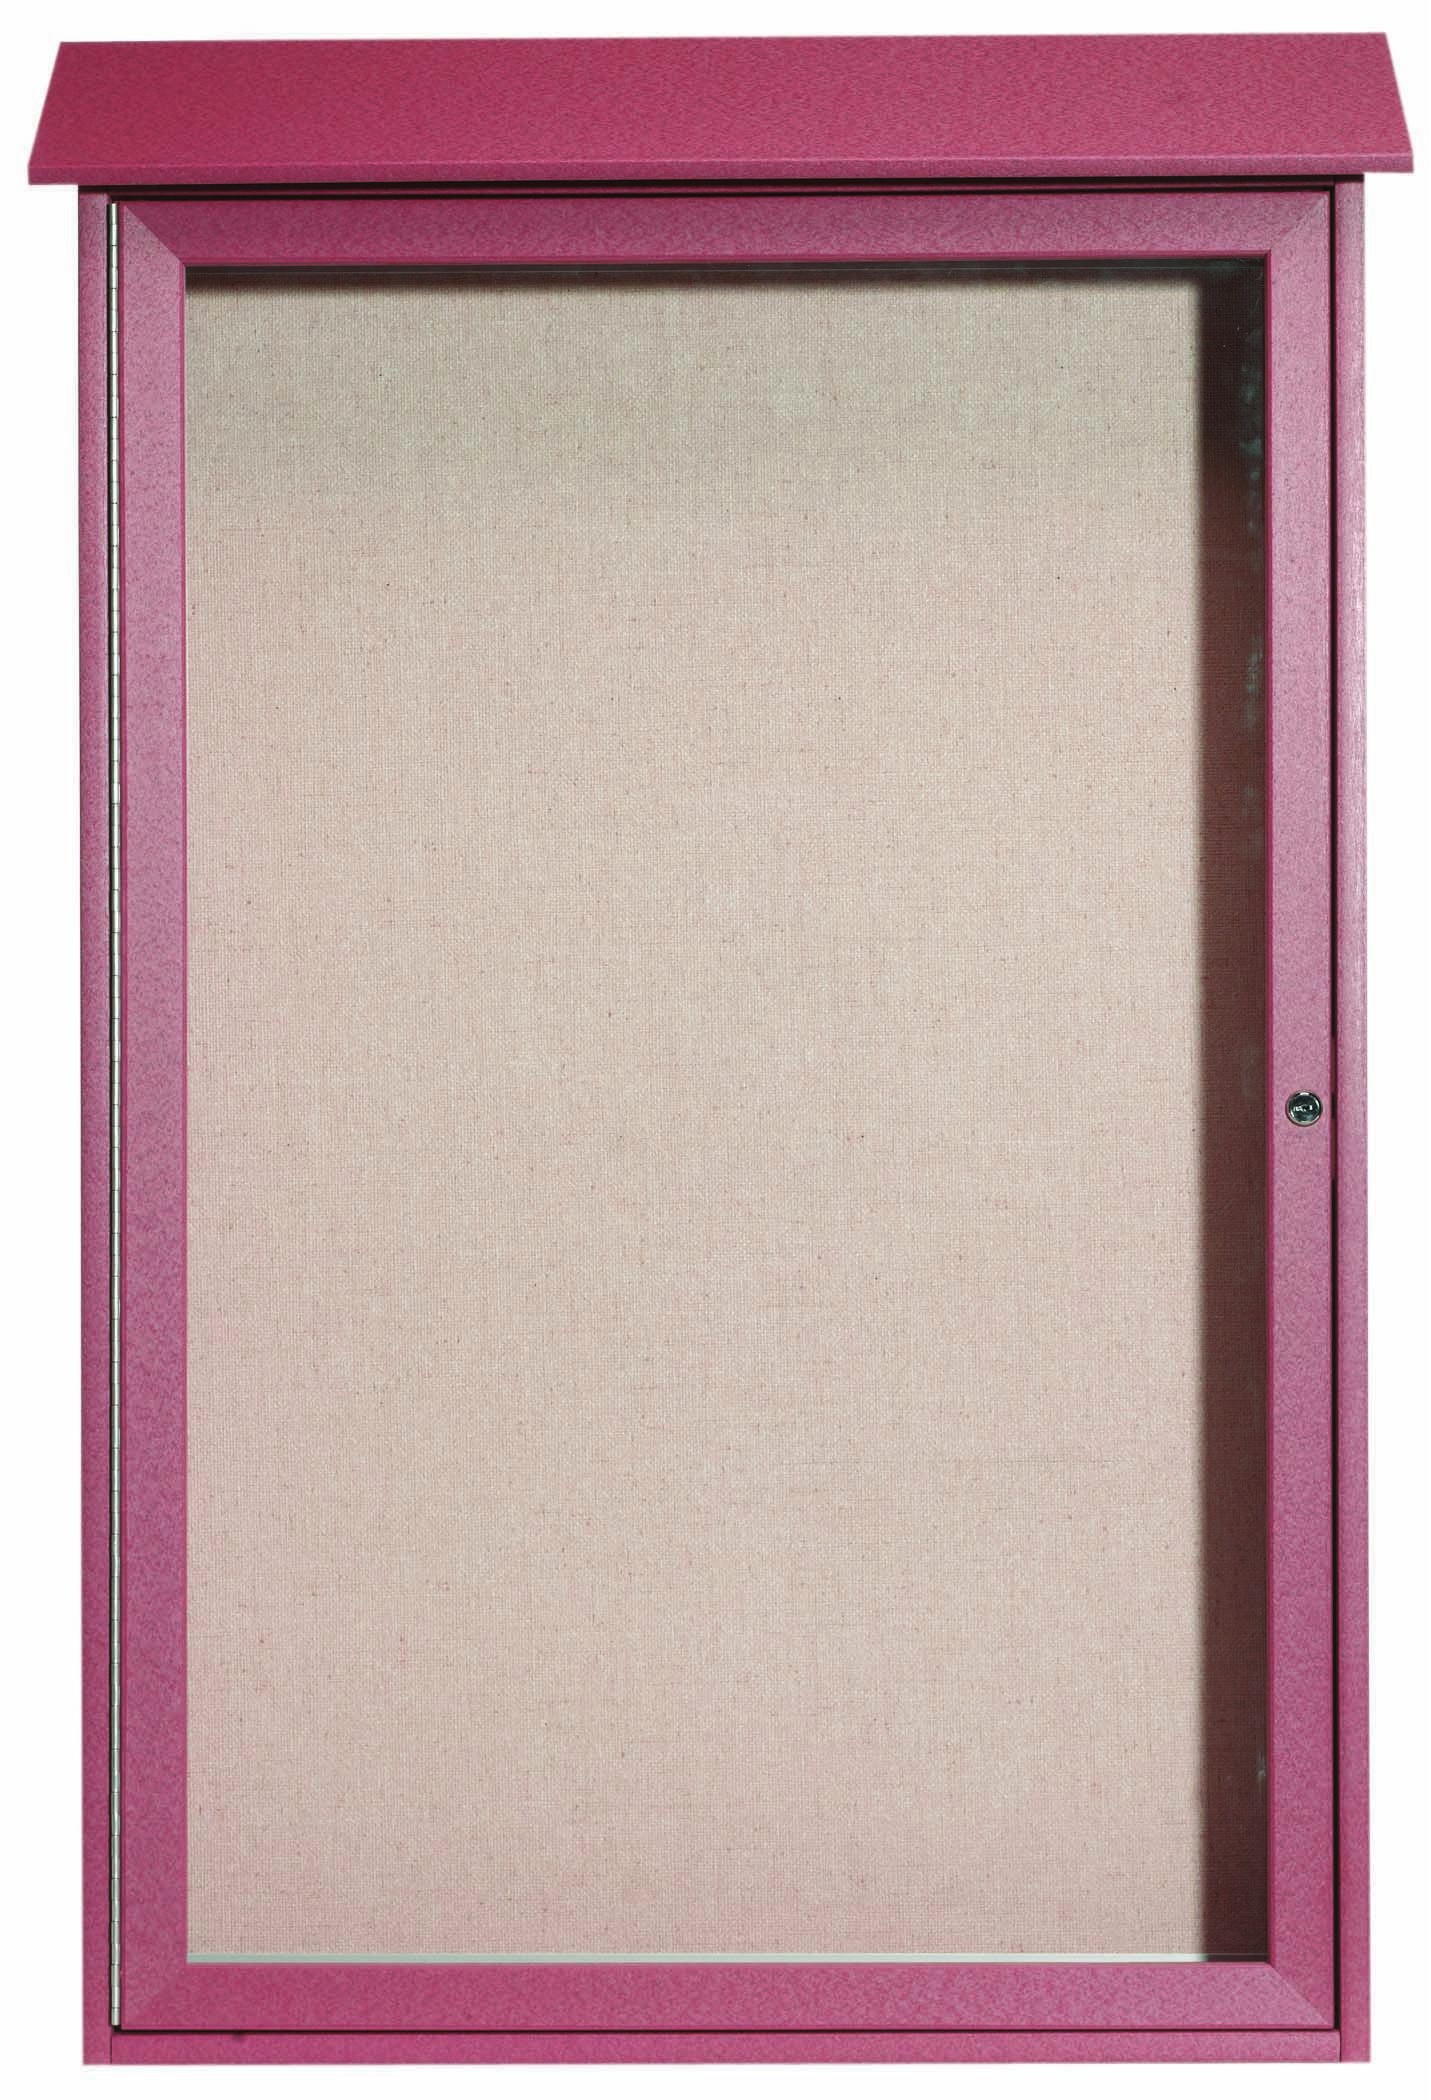 Aarco Products PLD4832-7 Rosewood Single Hinged Door Plastic Lumber Message Center with Vinyl Board, 32"W x 48"H